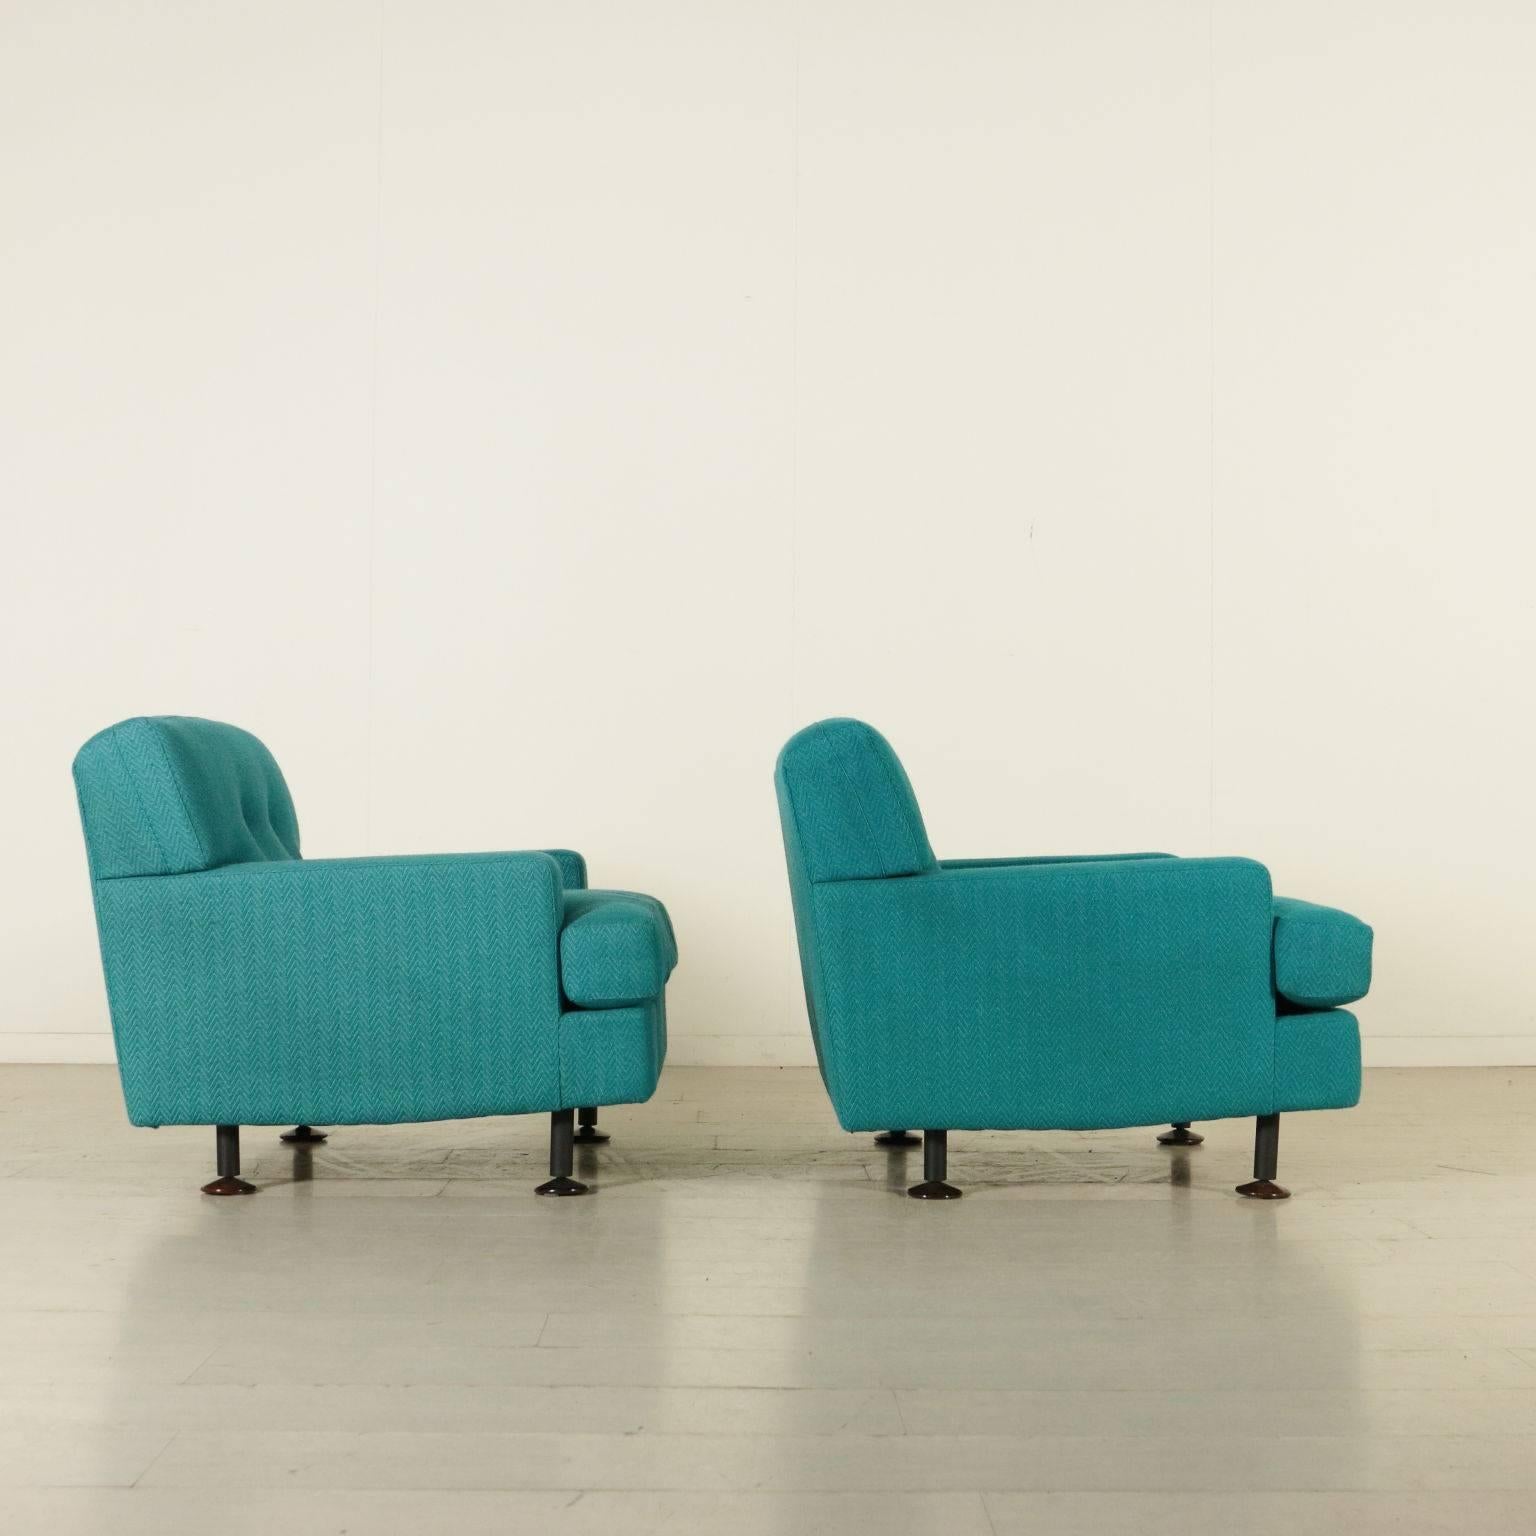 Pair of Armchairs by Marco Zanuso for Arflex Foam Latex Vintage, Italy, 1962 1